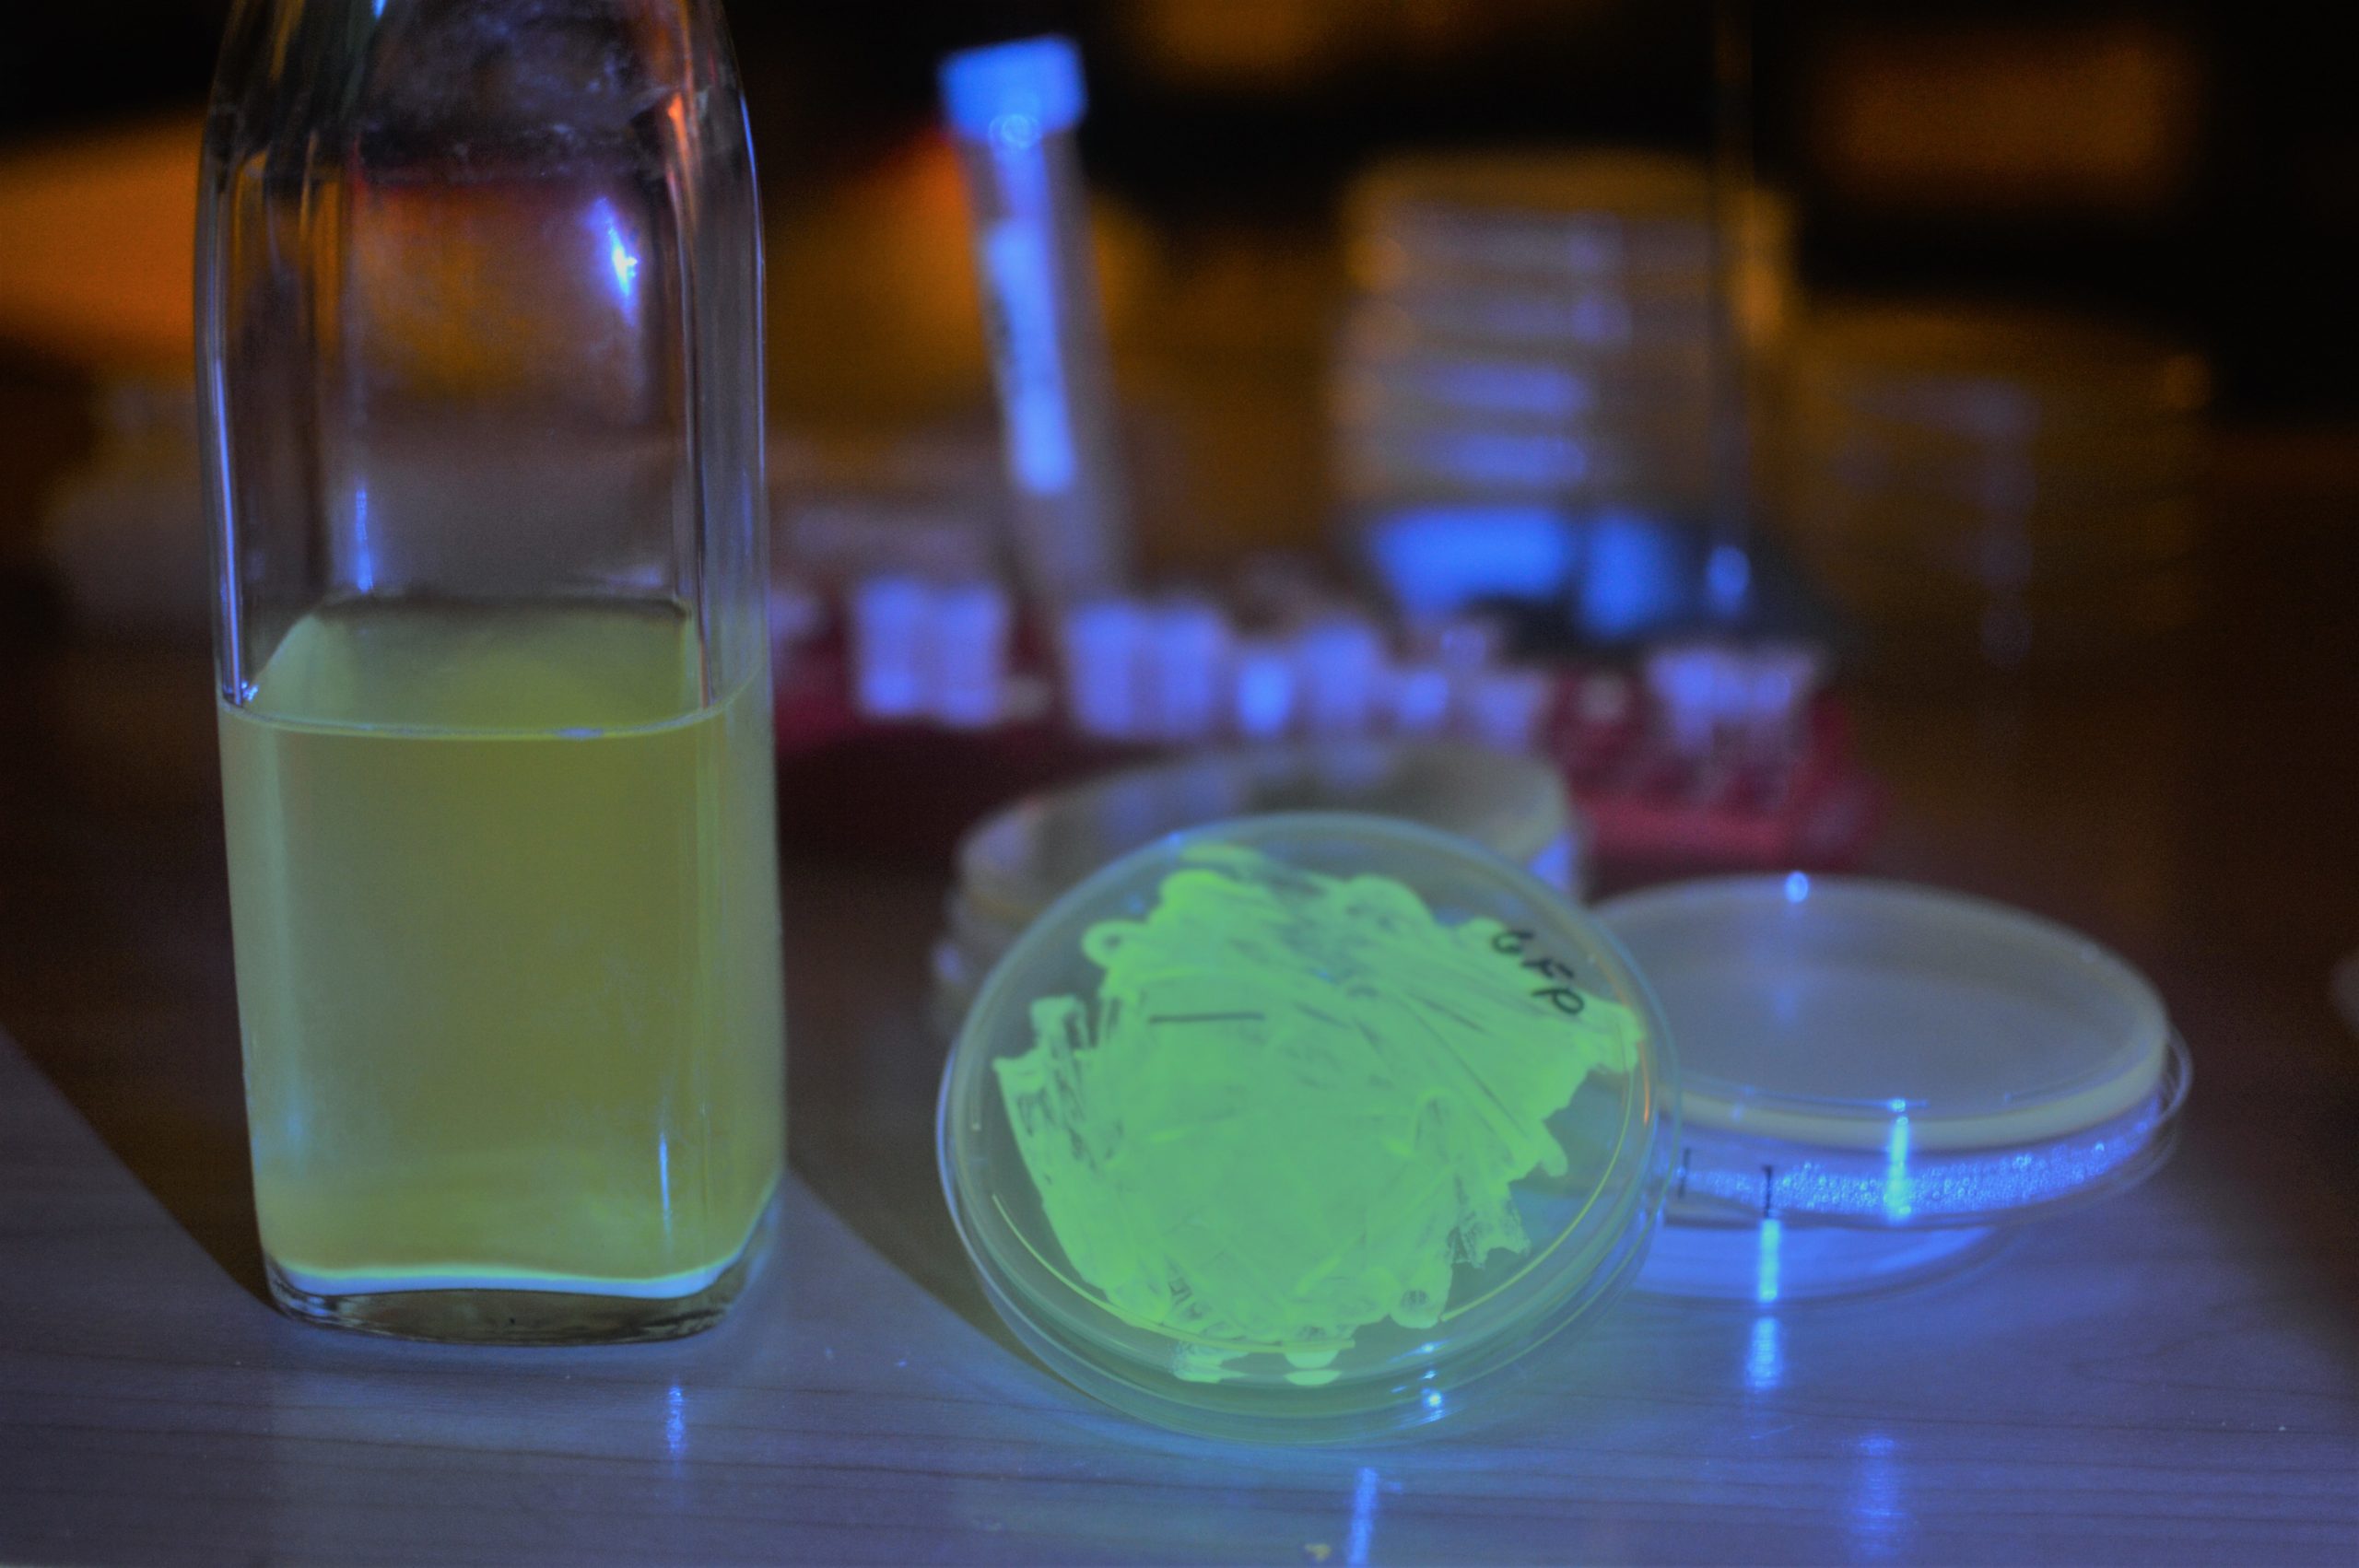 This Biohacker Wants To Spur A Genetic Engineering Revolution With Glowing Beer